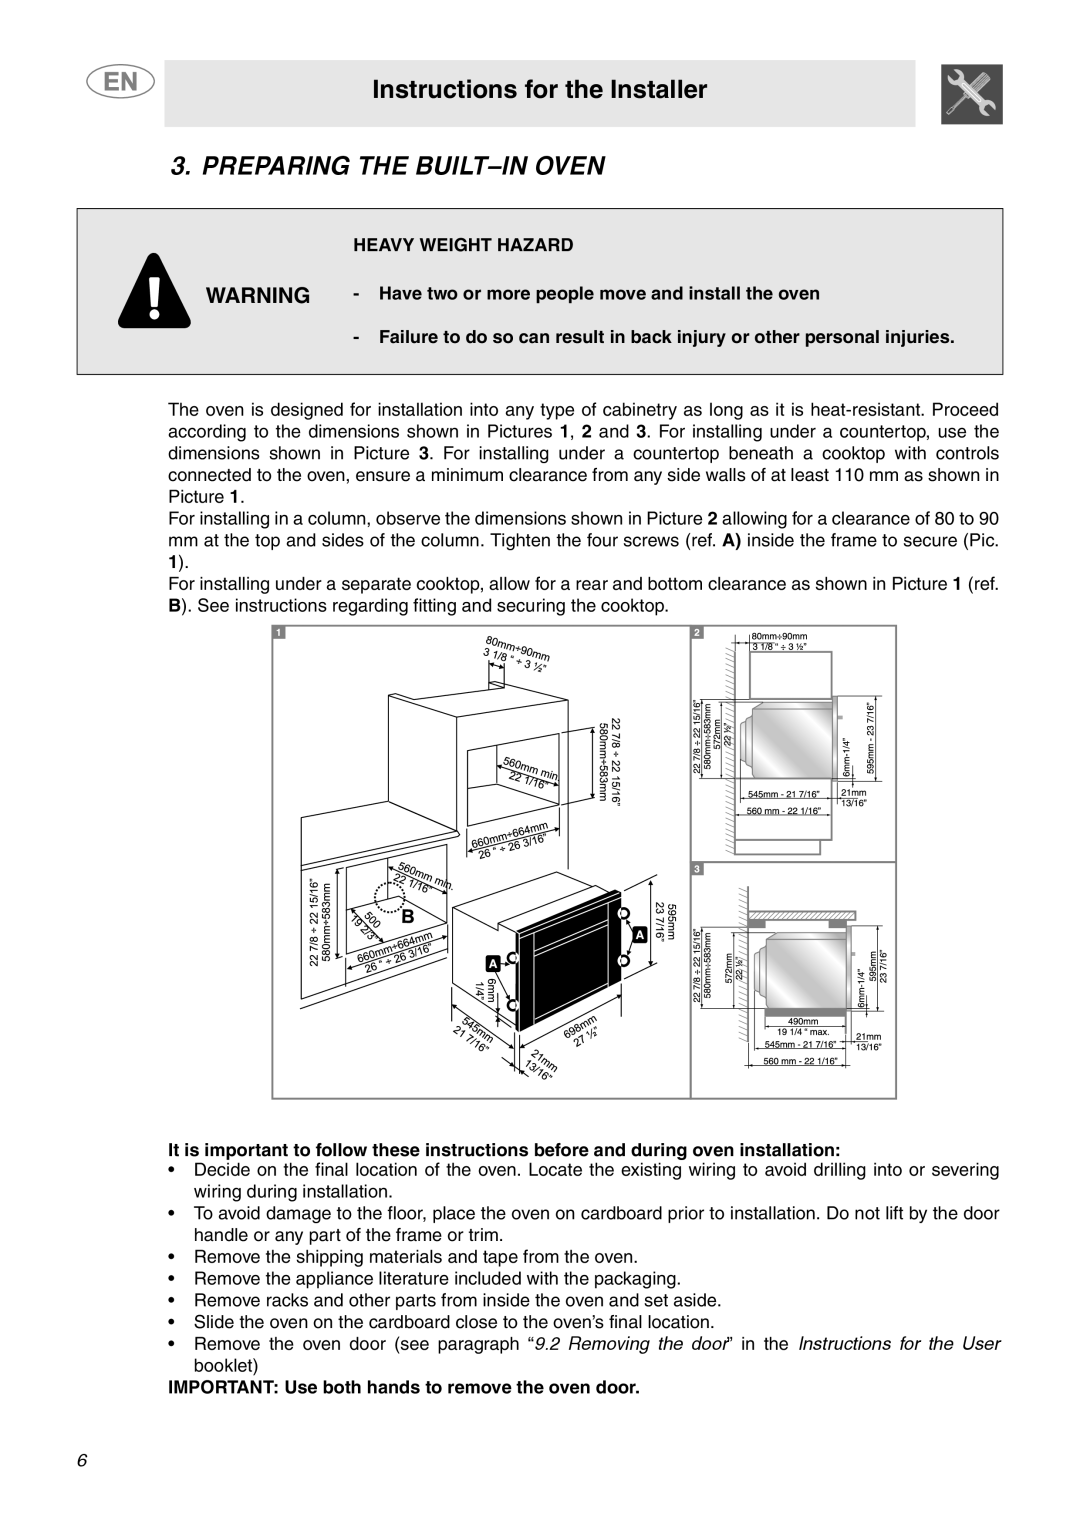 Smeg SC712U important safety instructions Instructions for the Installer, Preparing The Built-In Oven, Heavy Weight Hazard 